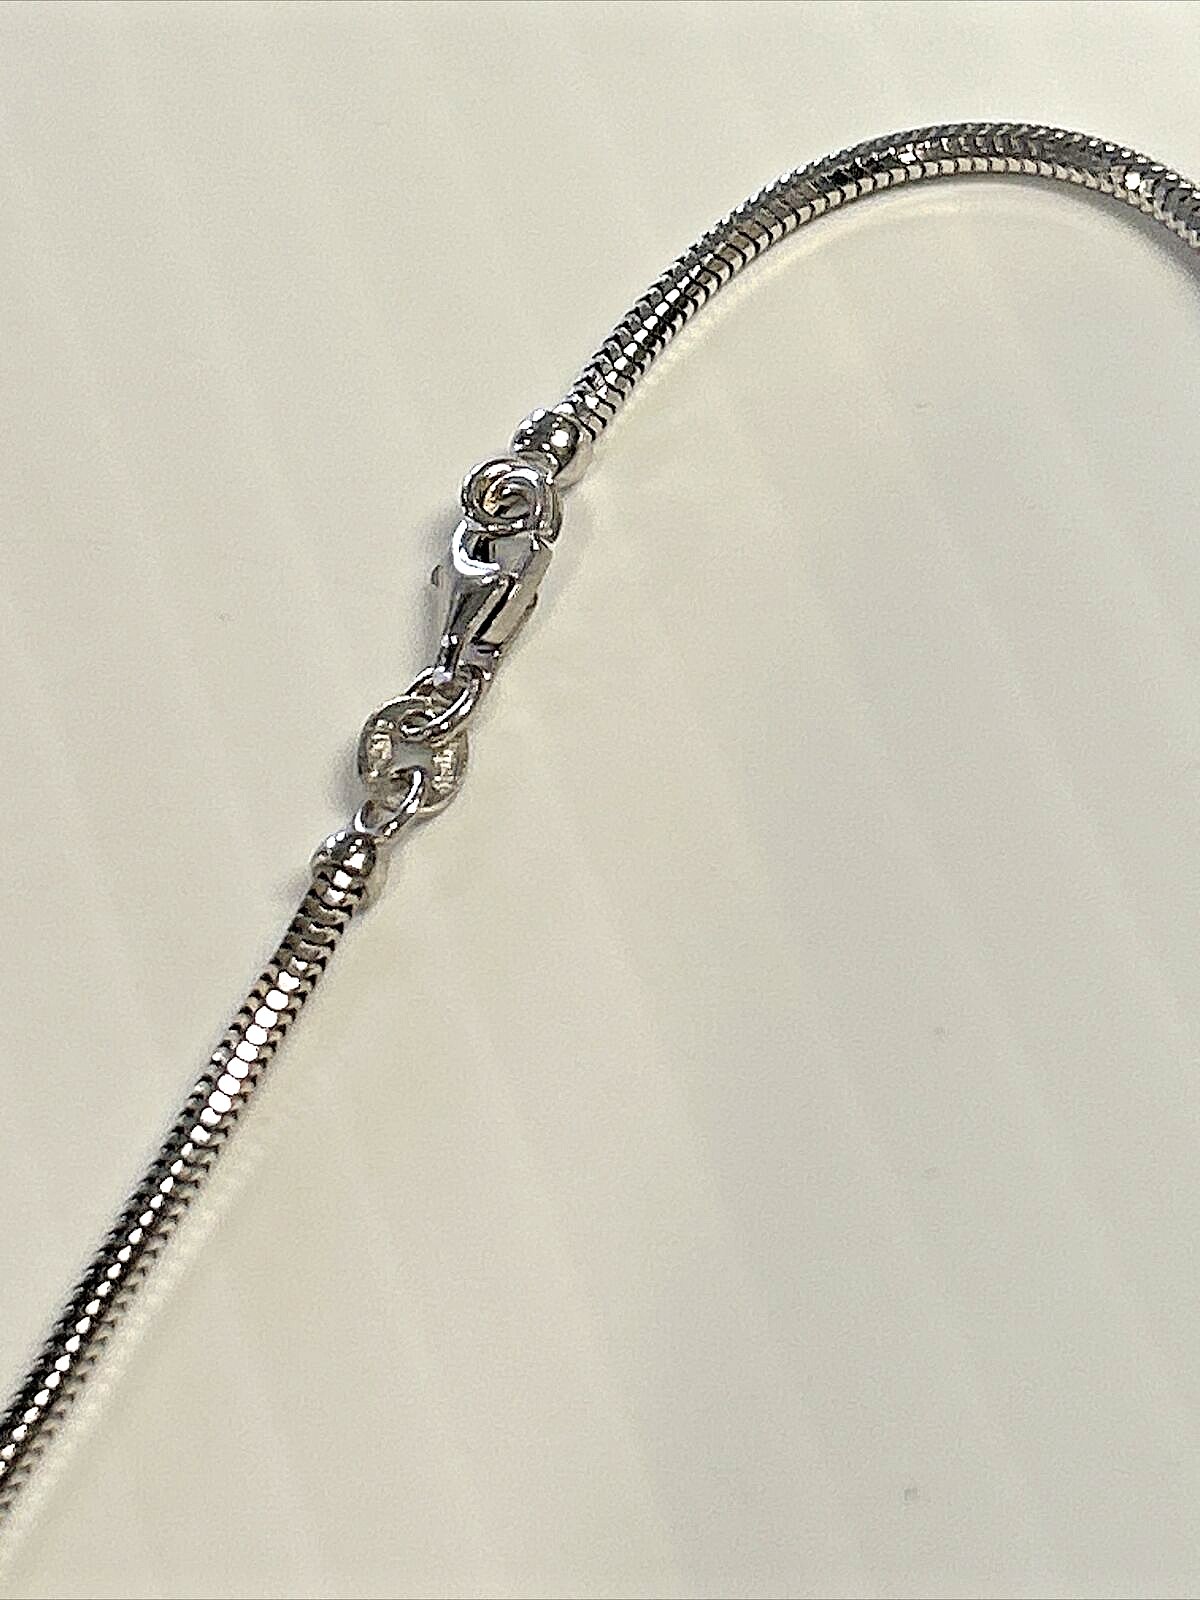 18k 750 Italy White Gold Snake Chain 18 Inches - 9.4 Grams - 1.8mm